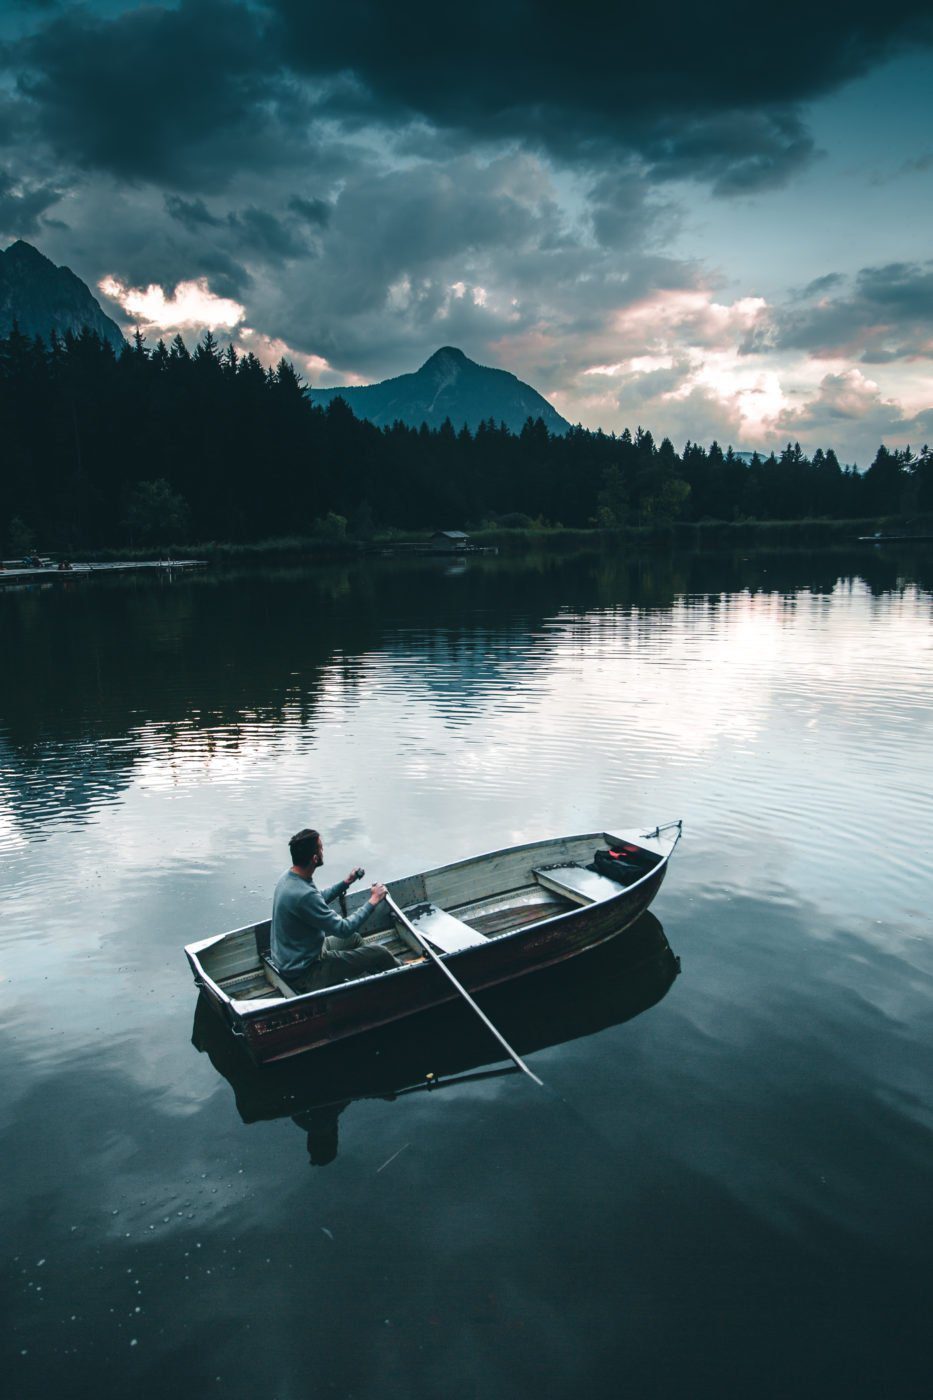 Lago di Fie, famous Instagram location in South Tyrol